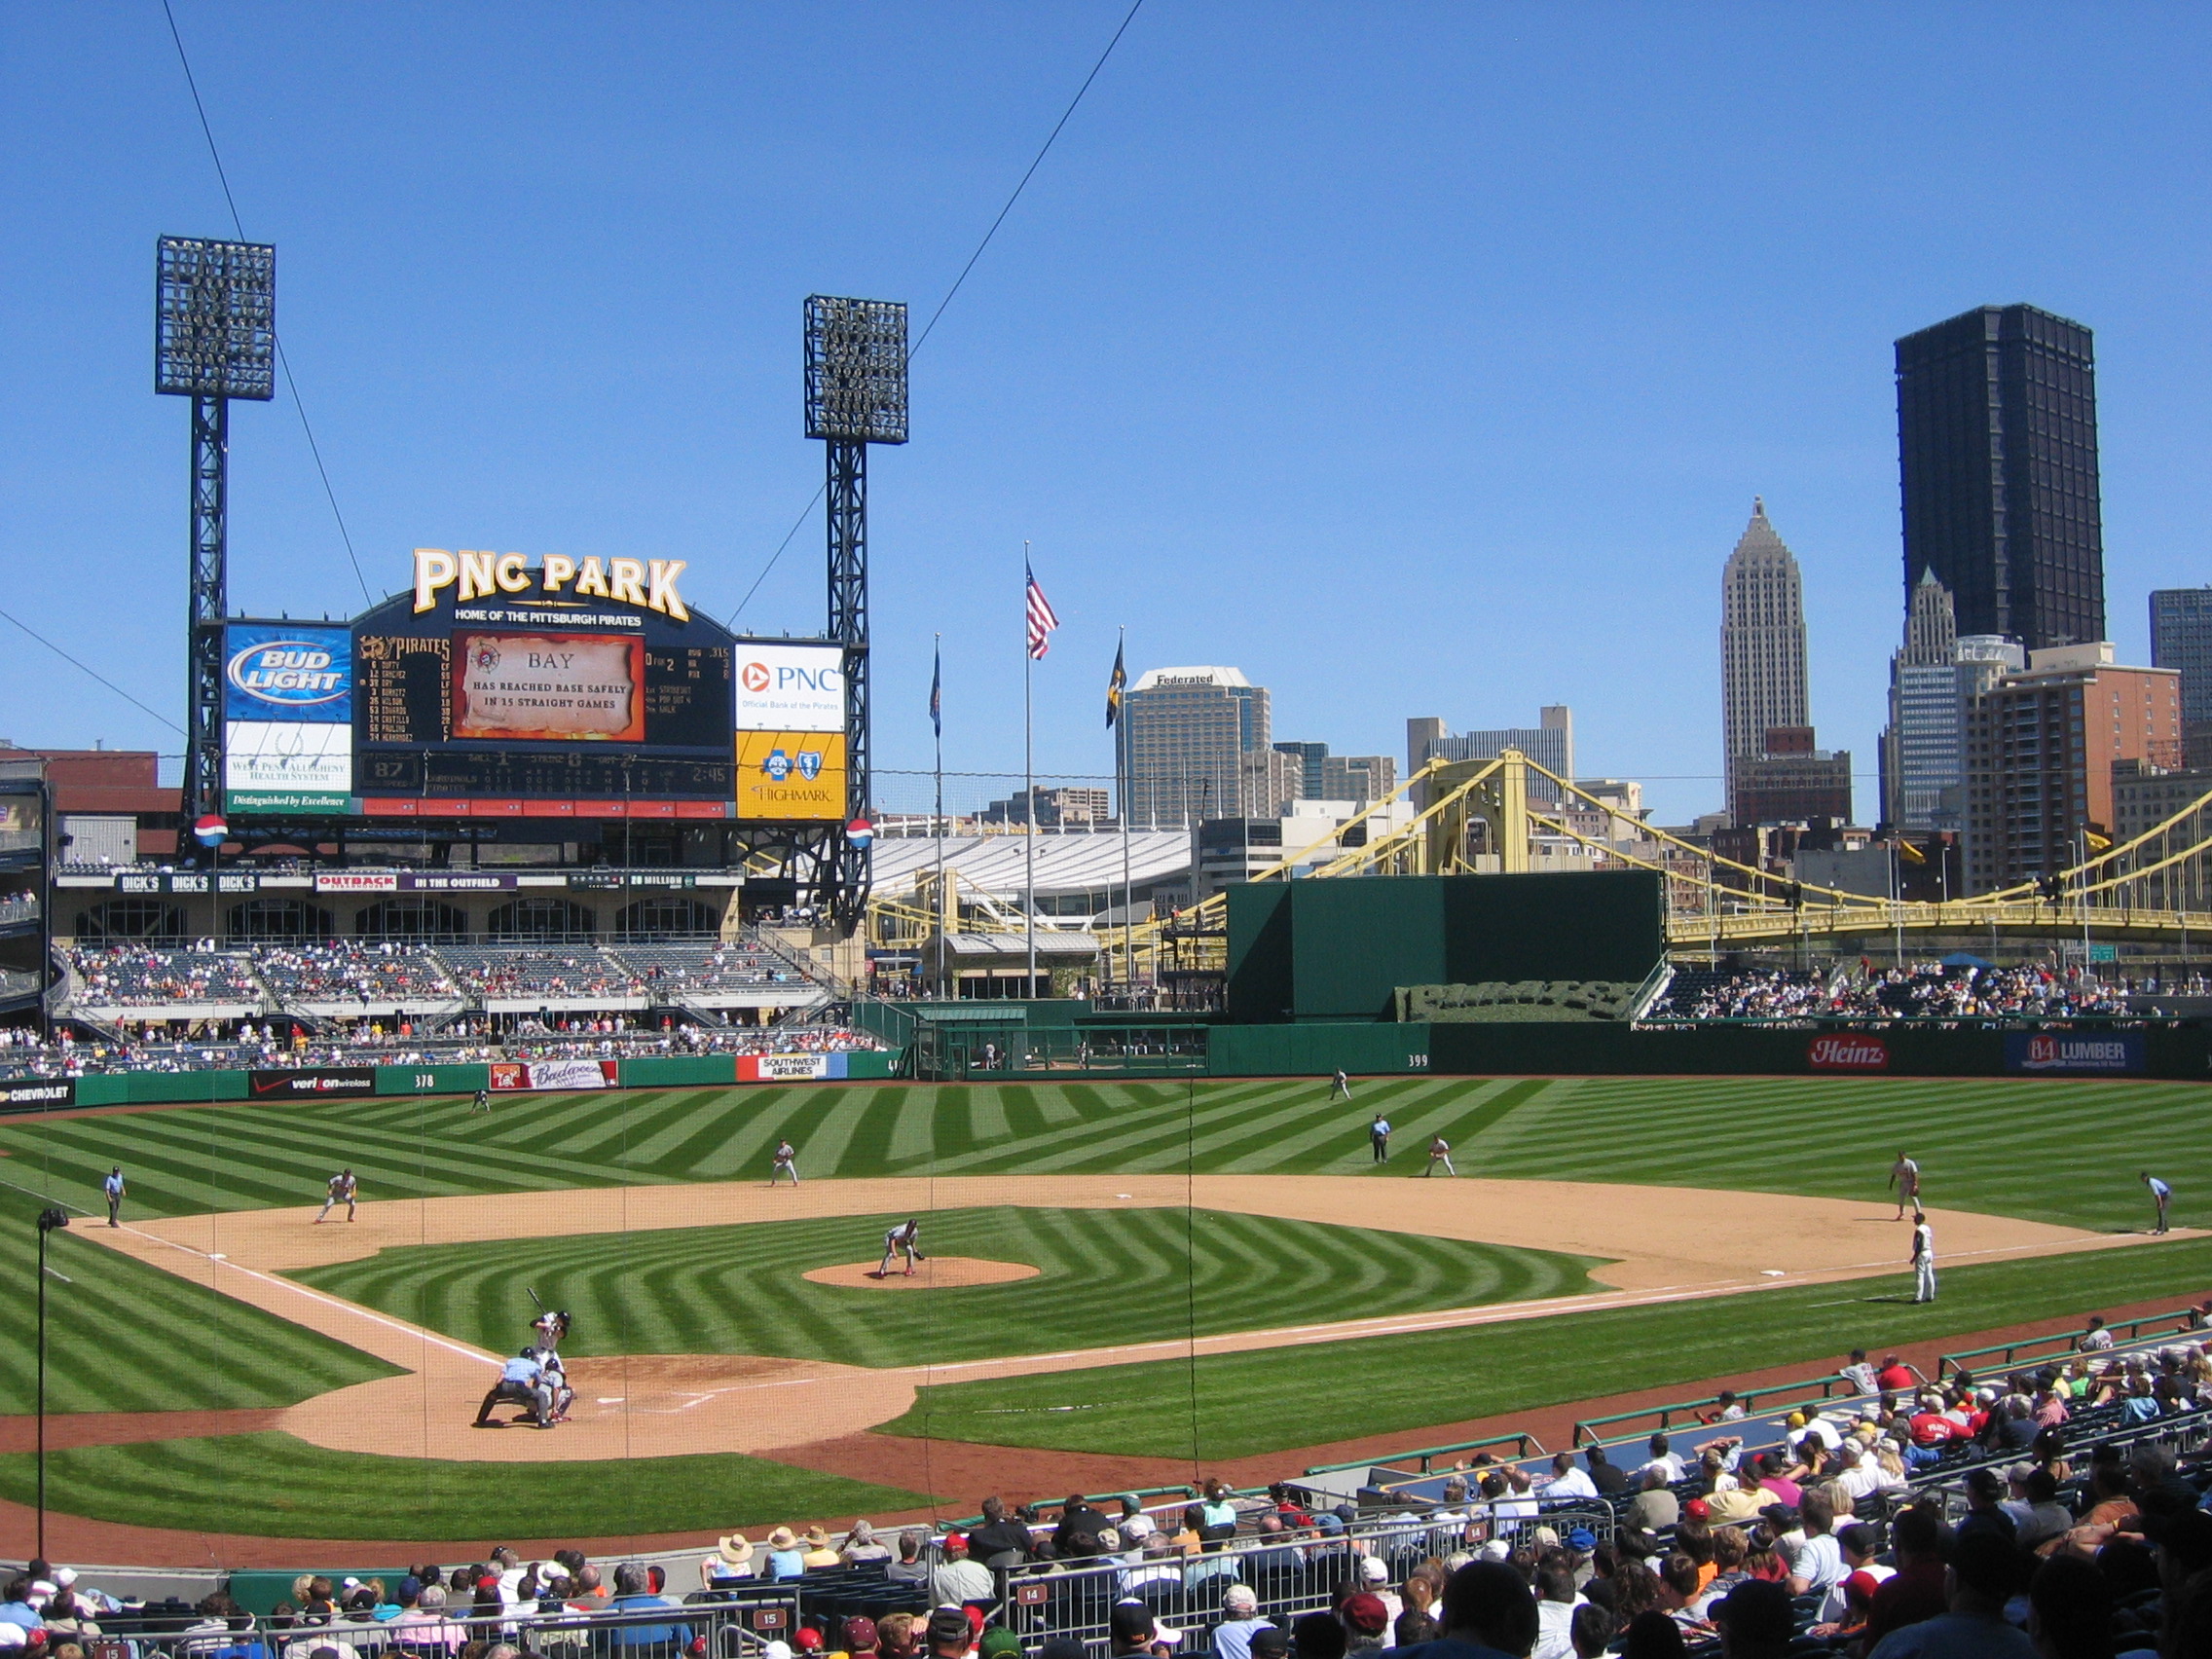  here's today's Friday Foto of sorts: PNC Park Field View.